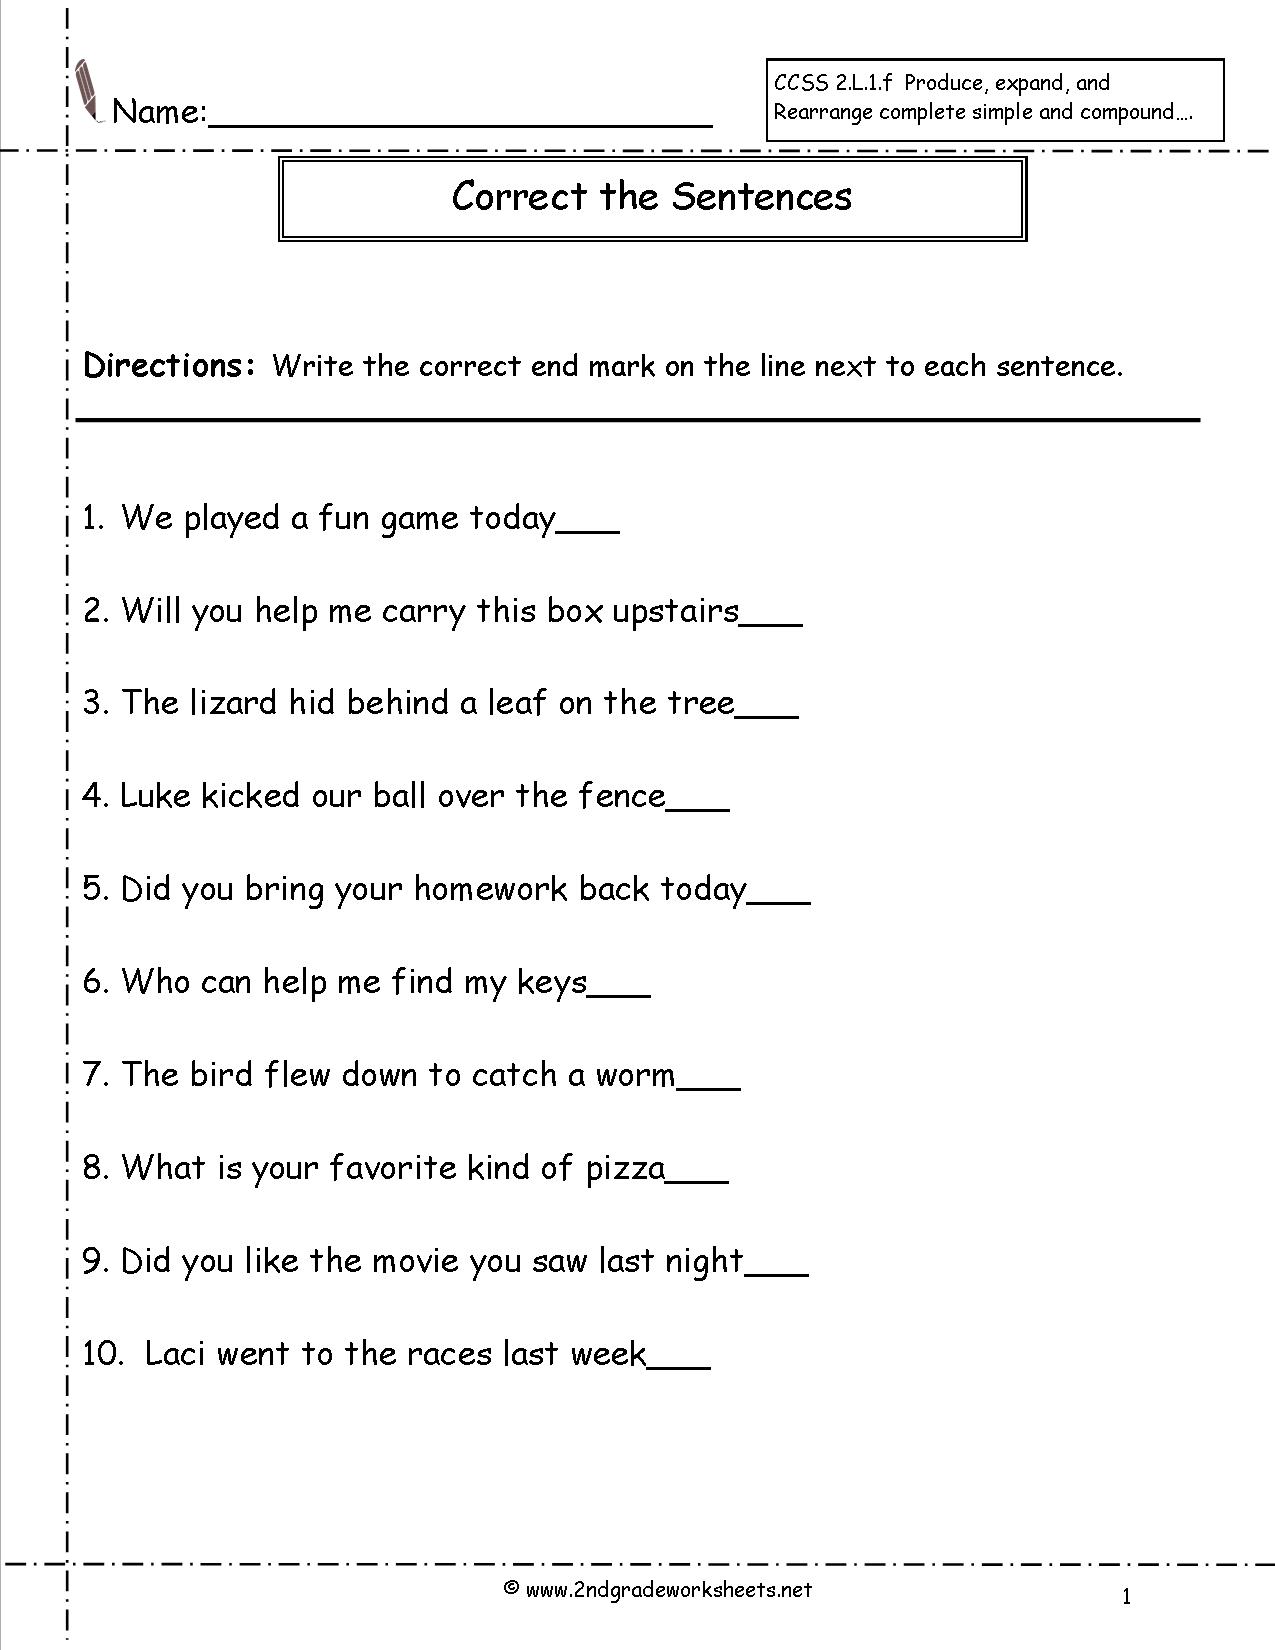 Statements and Questions Worksheets 2nd Grade Image